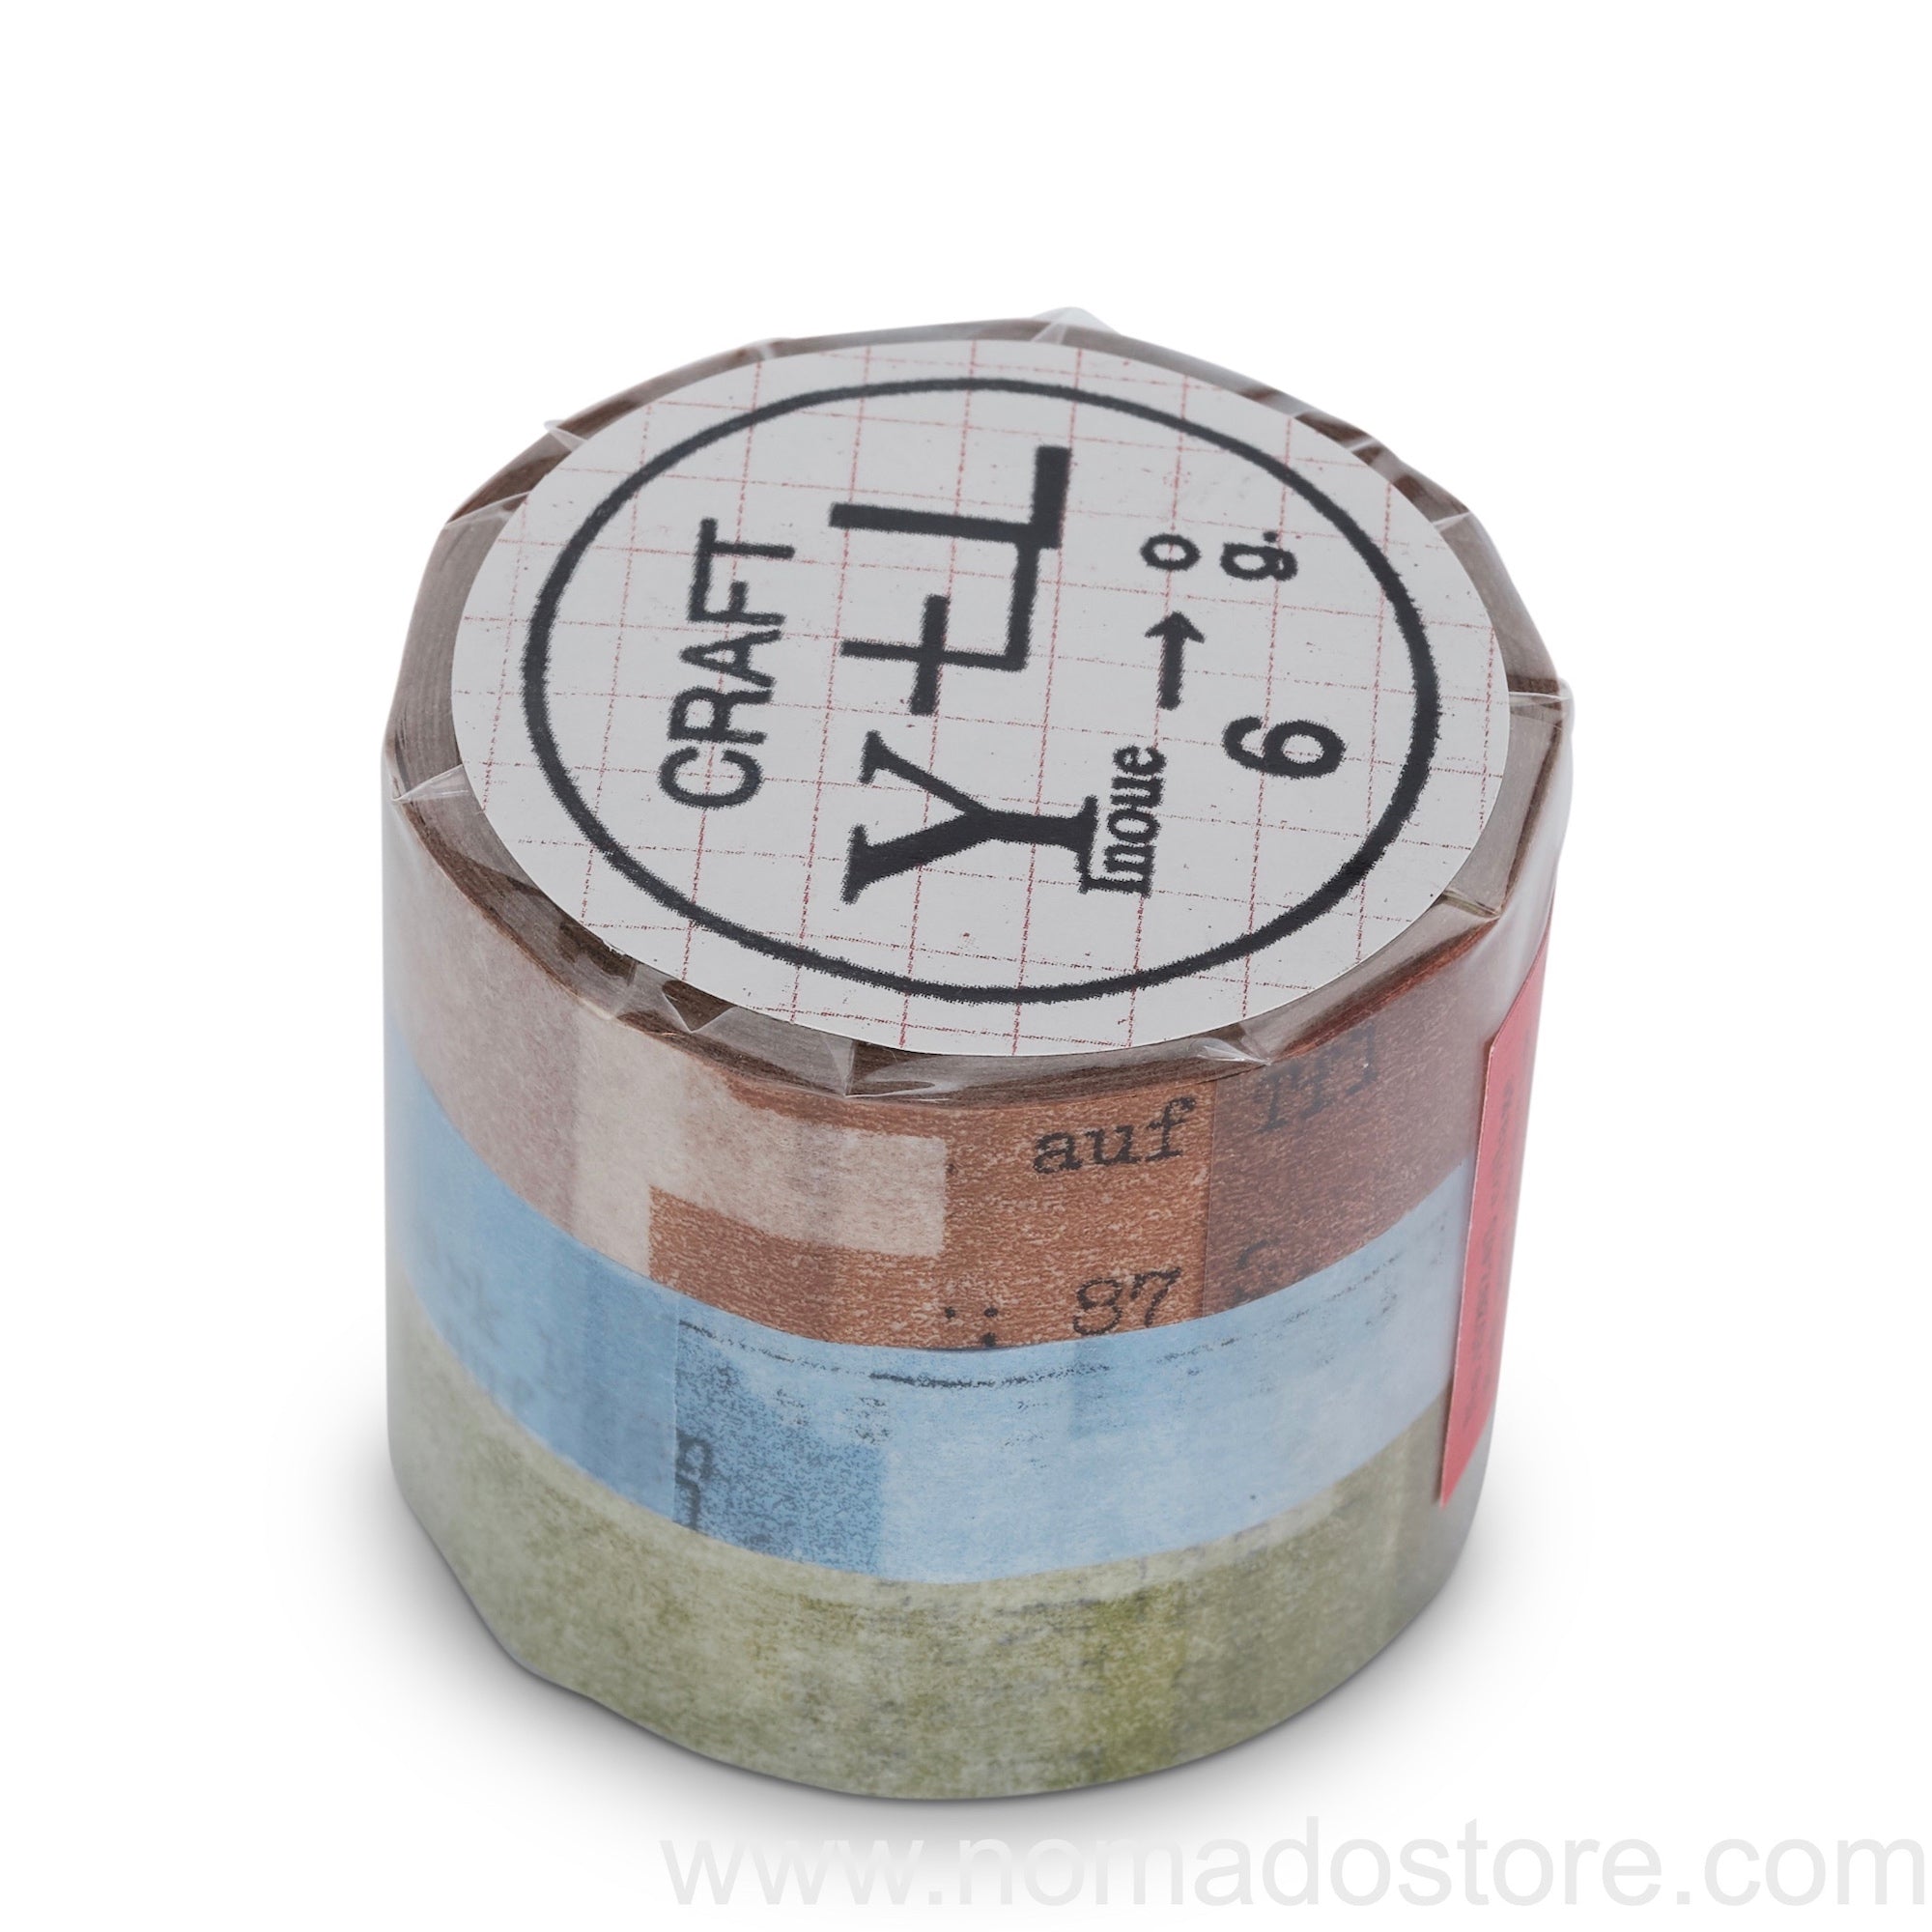 Classiky Collage Masking Tape 3 colors set - NOMADO Store 